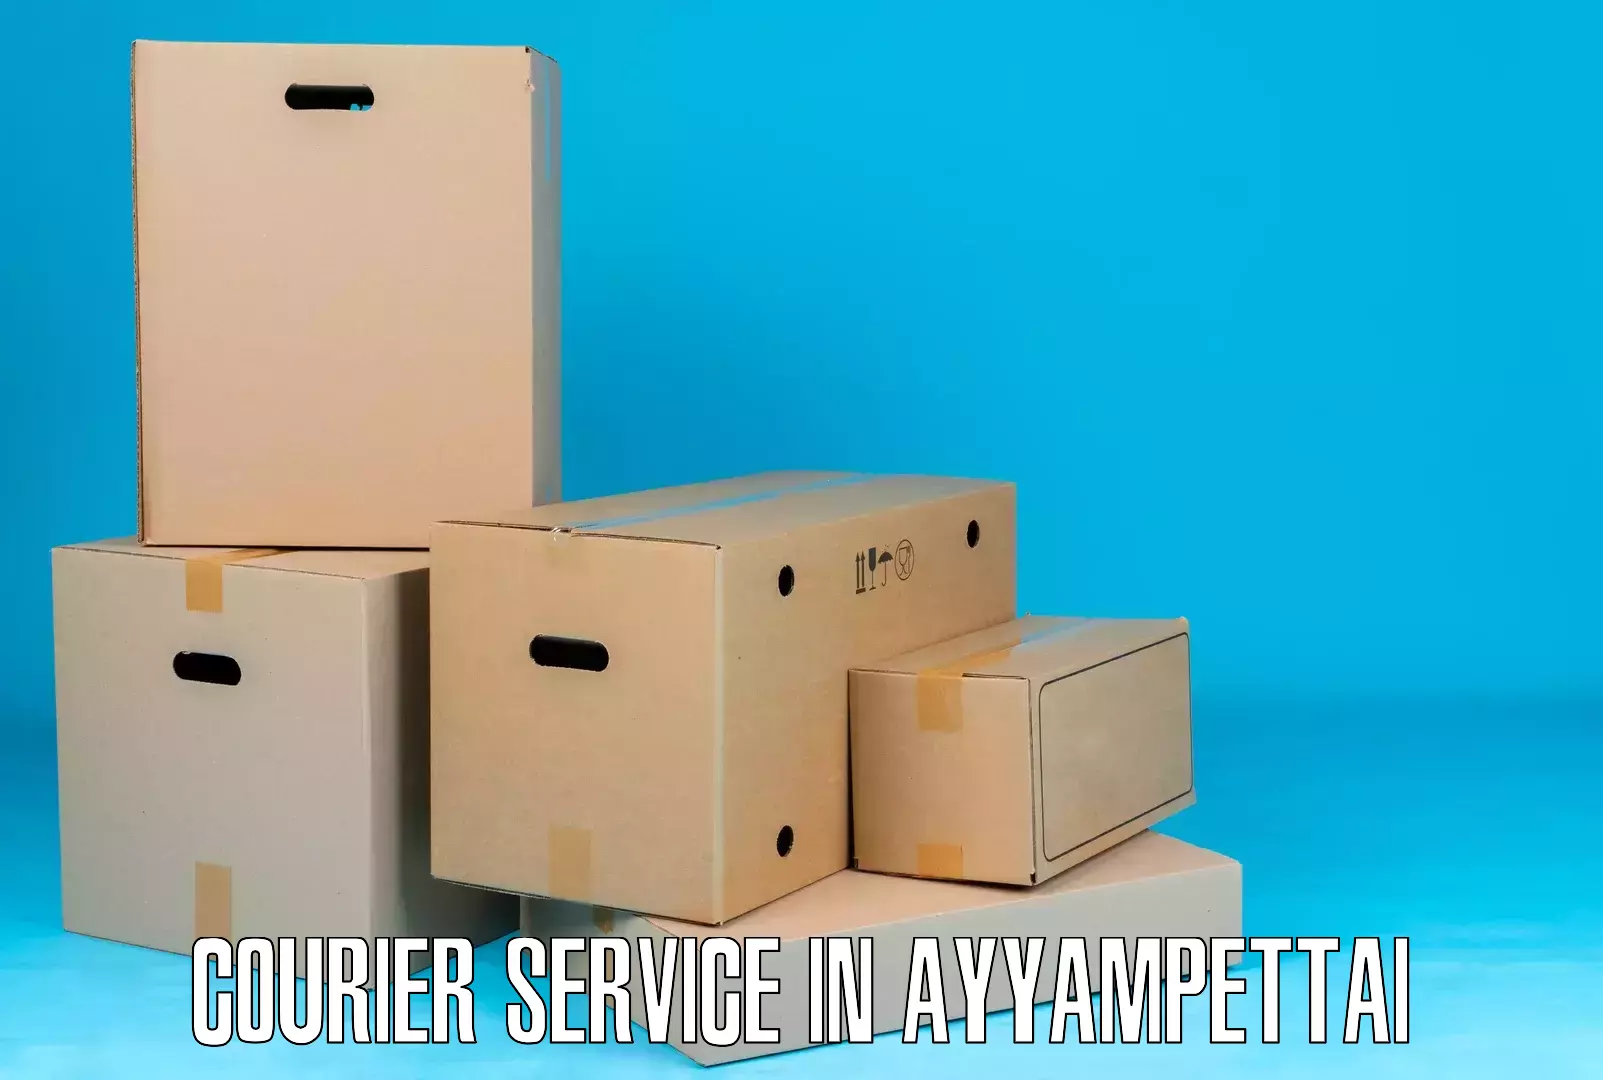 Comprehensive parcel tracking in Ayyampettai